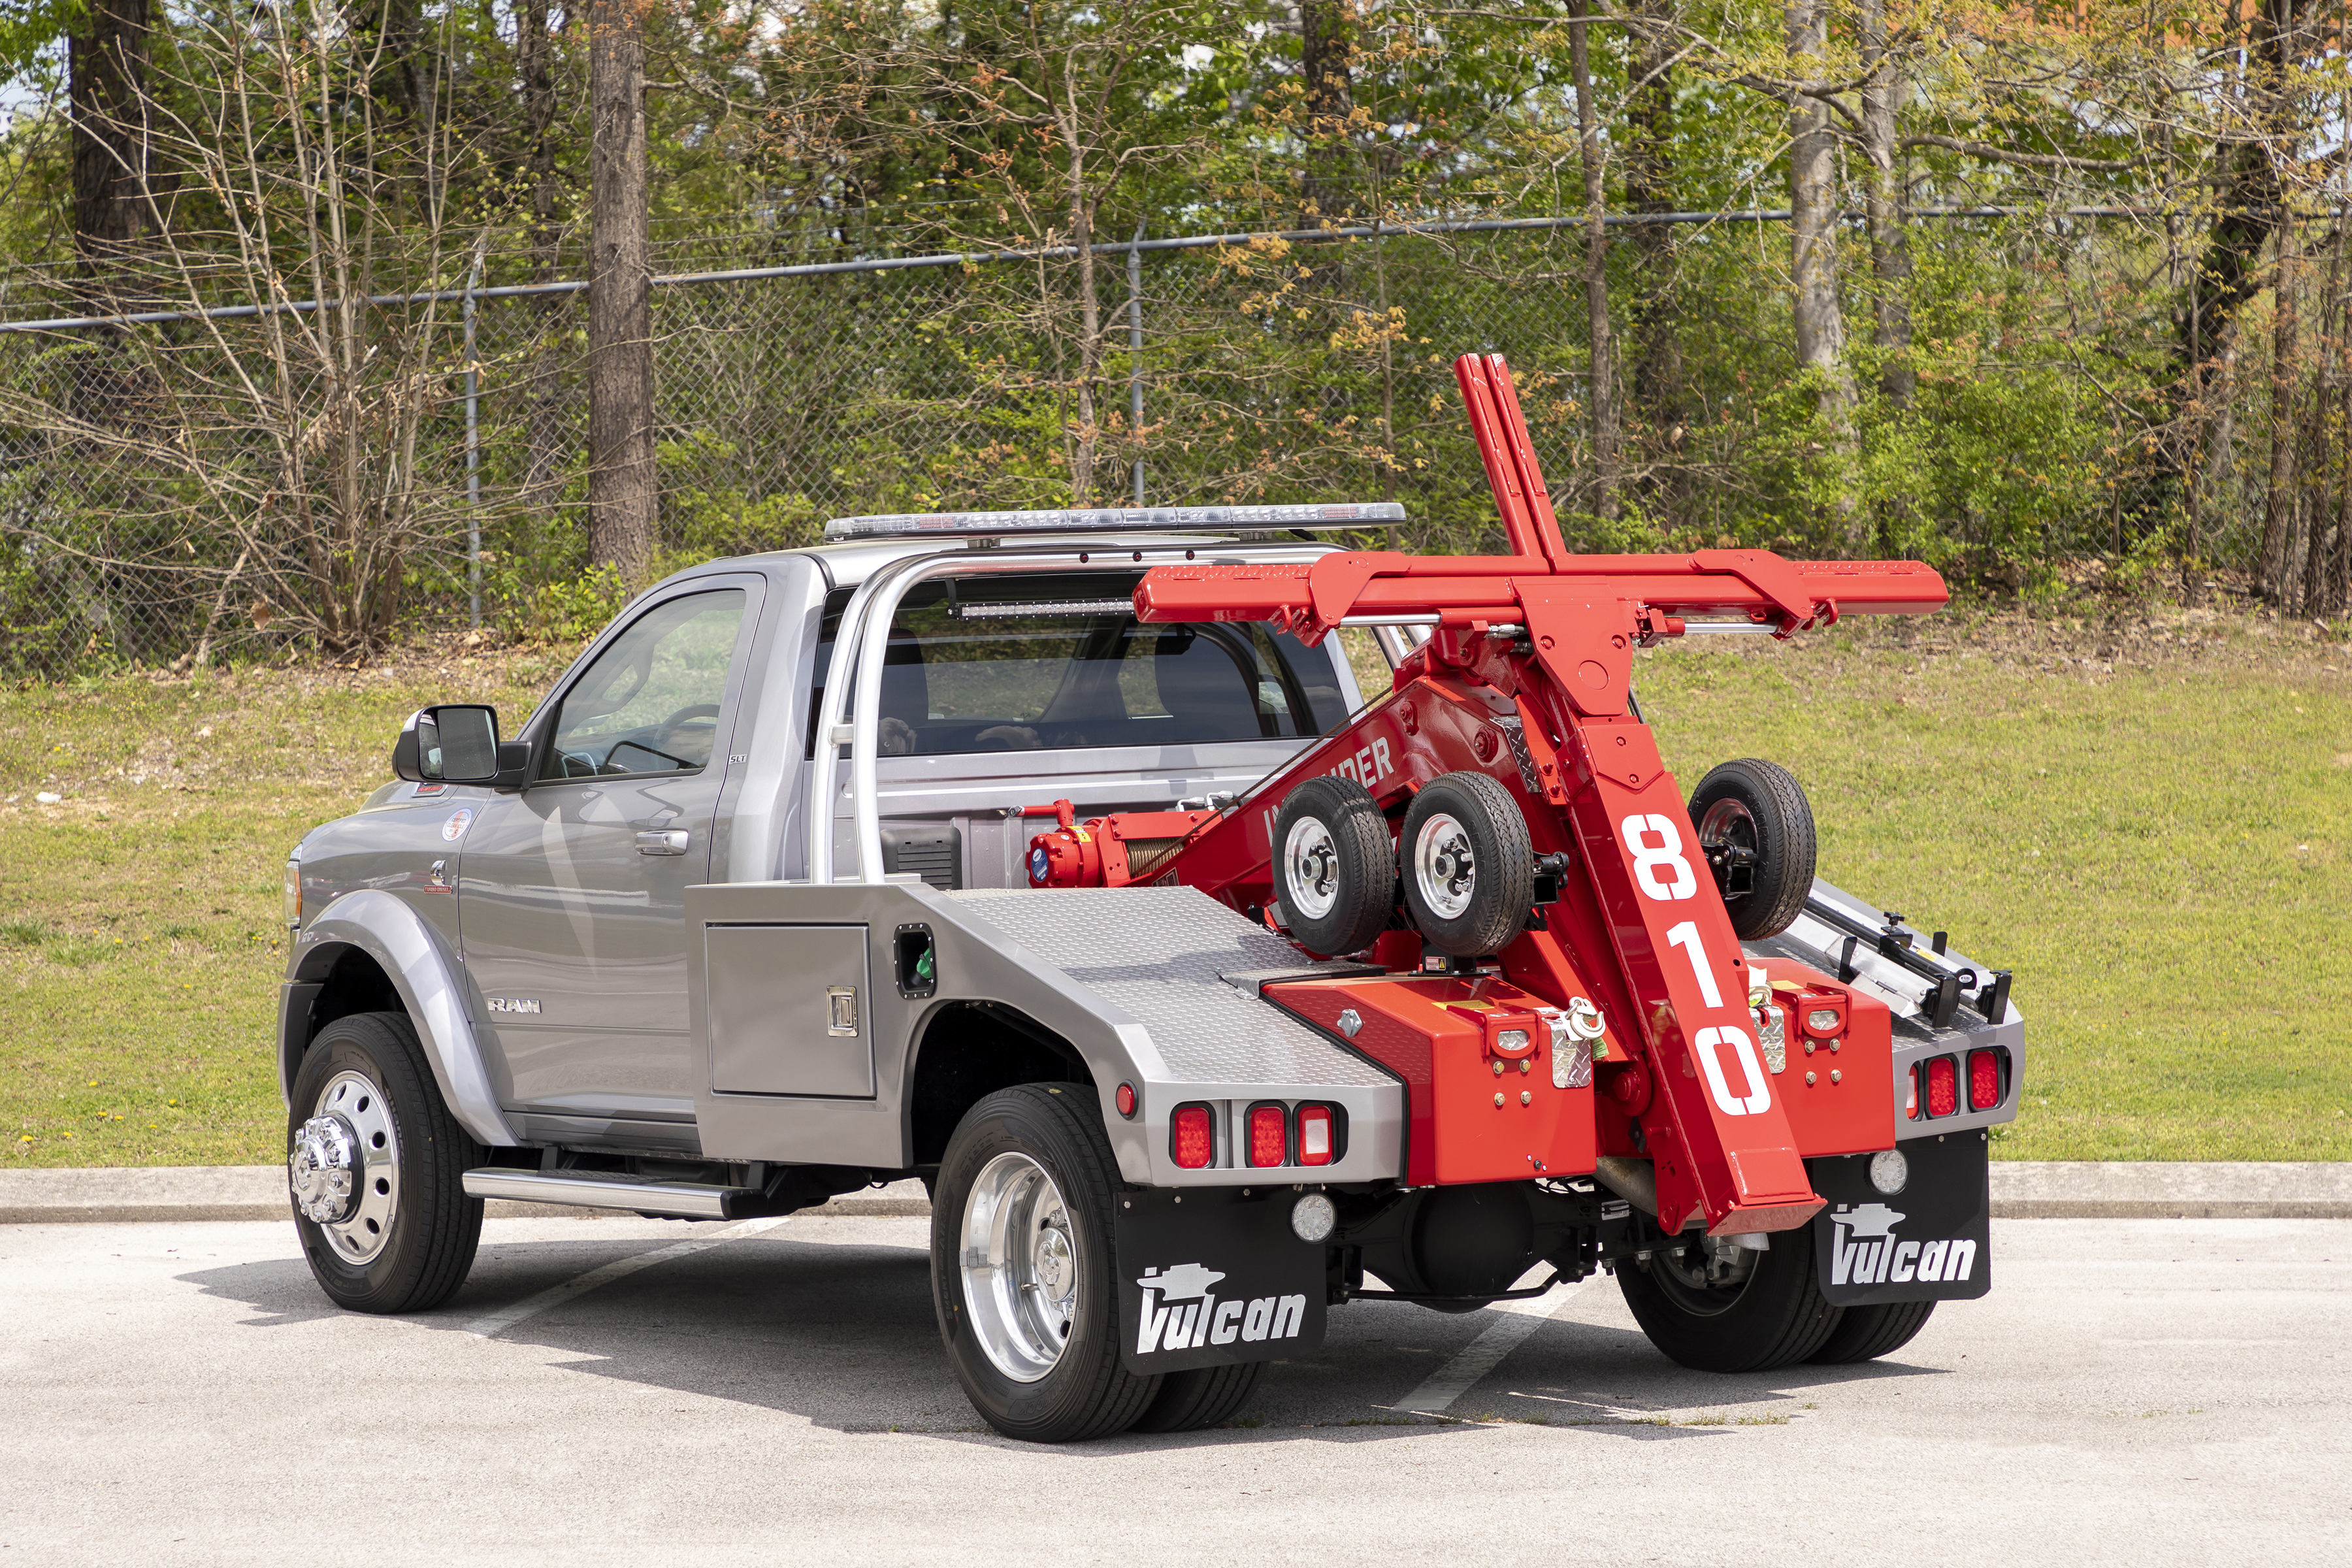 Vulcan 810 rear on a RAM 4500 chassis